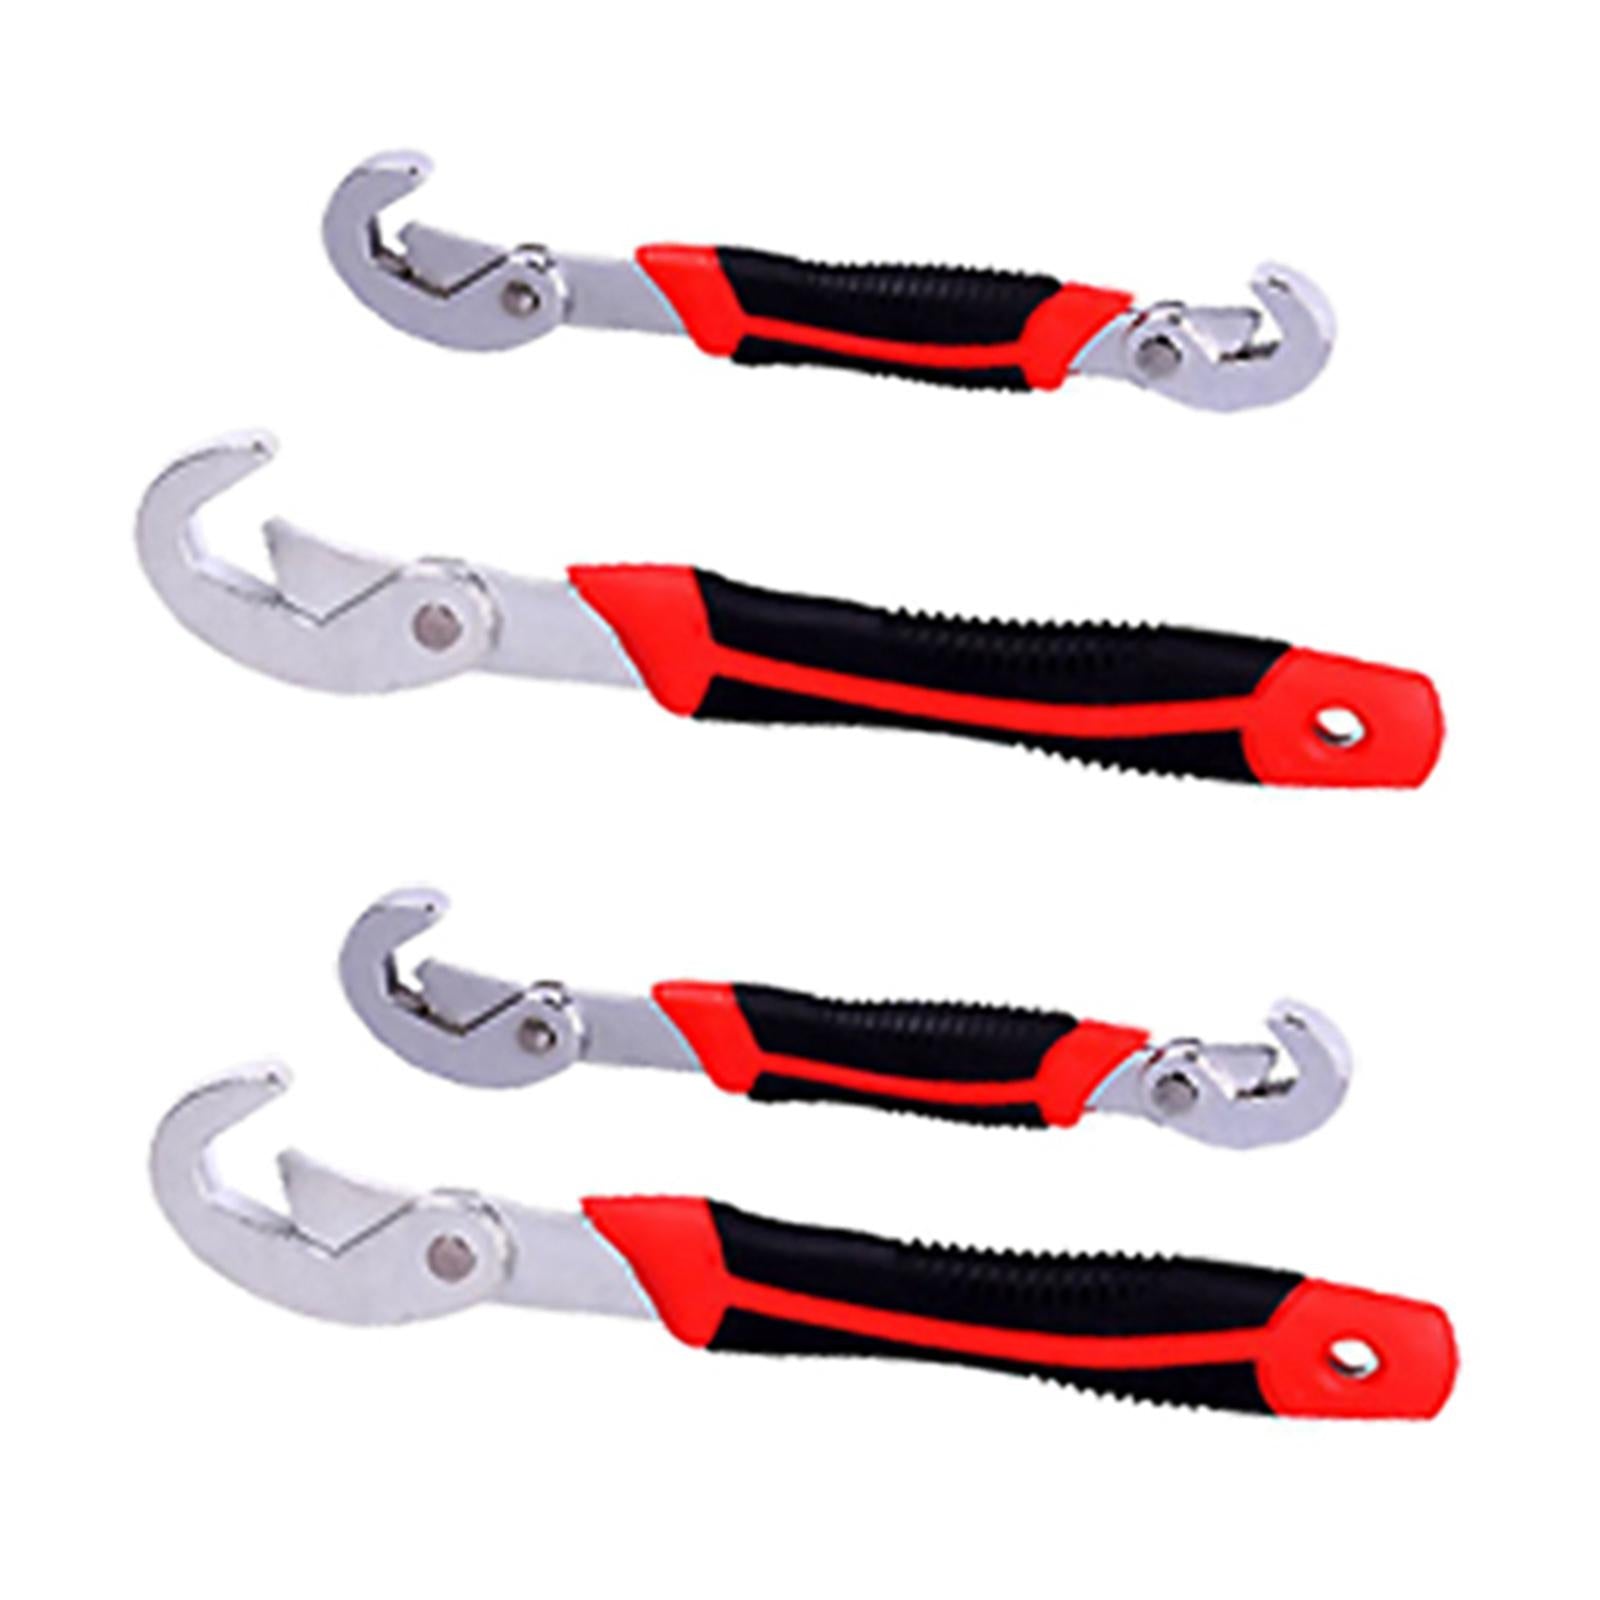 Universal Quick Snap Grip Wrench Repair Tool Steel for Home Kitchen Garden 2pcs